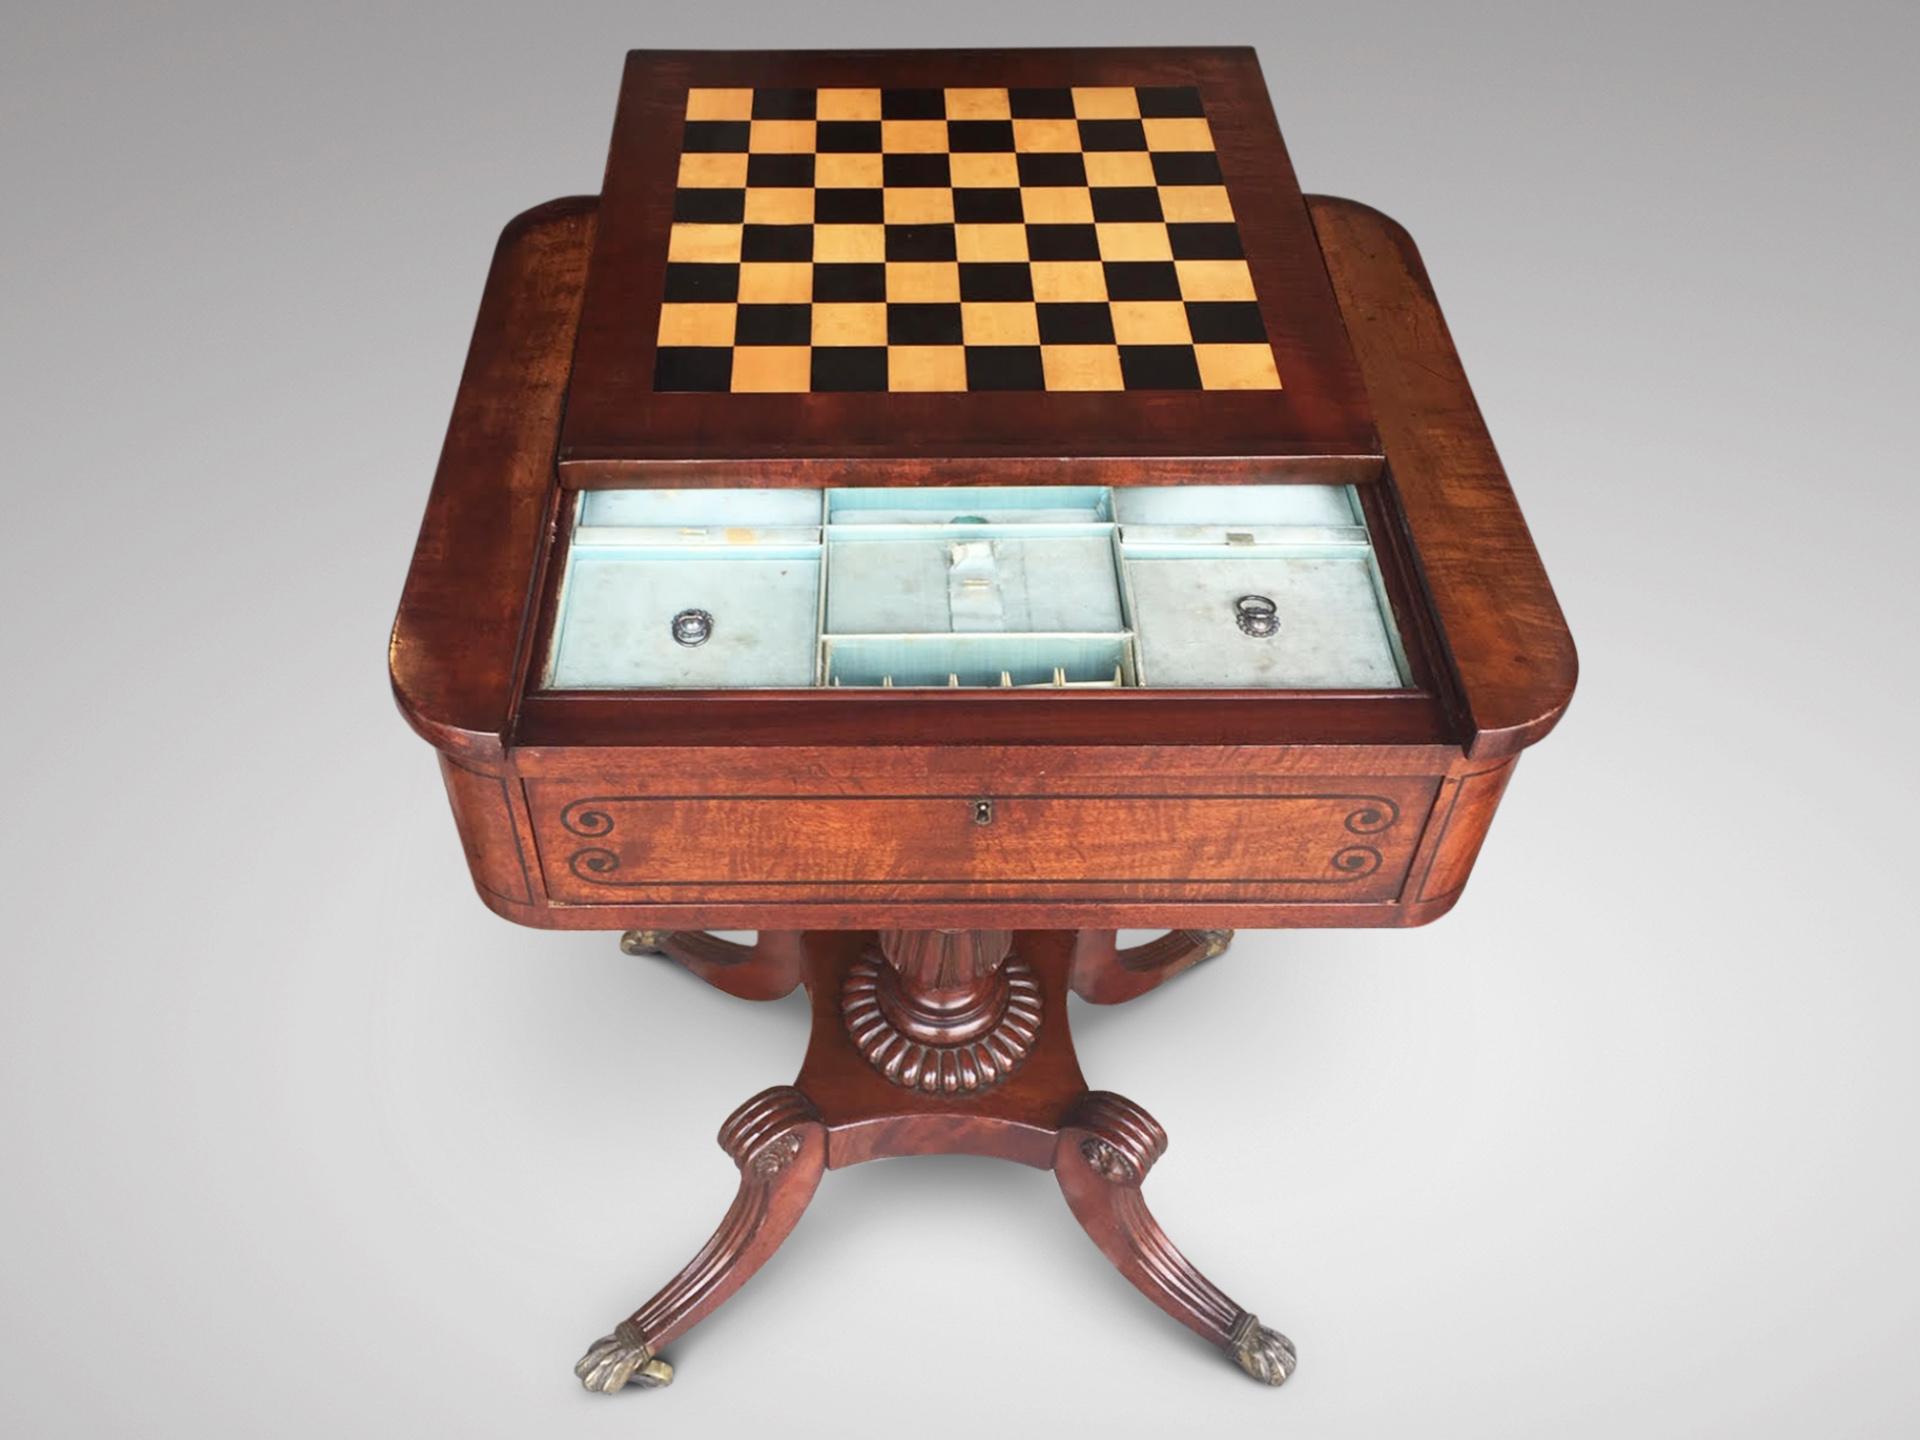 Marquetry Lovely 19th Century Georgian Period Mahogany Games and Chess Table